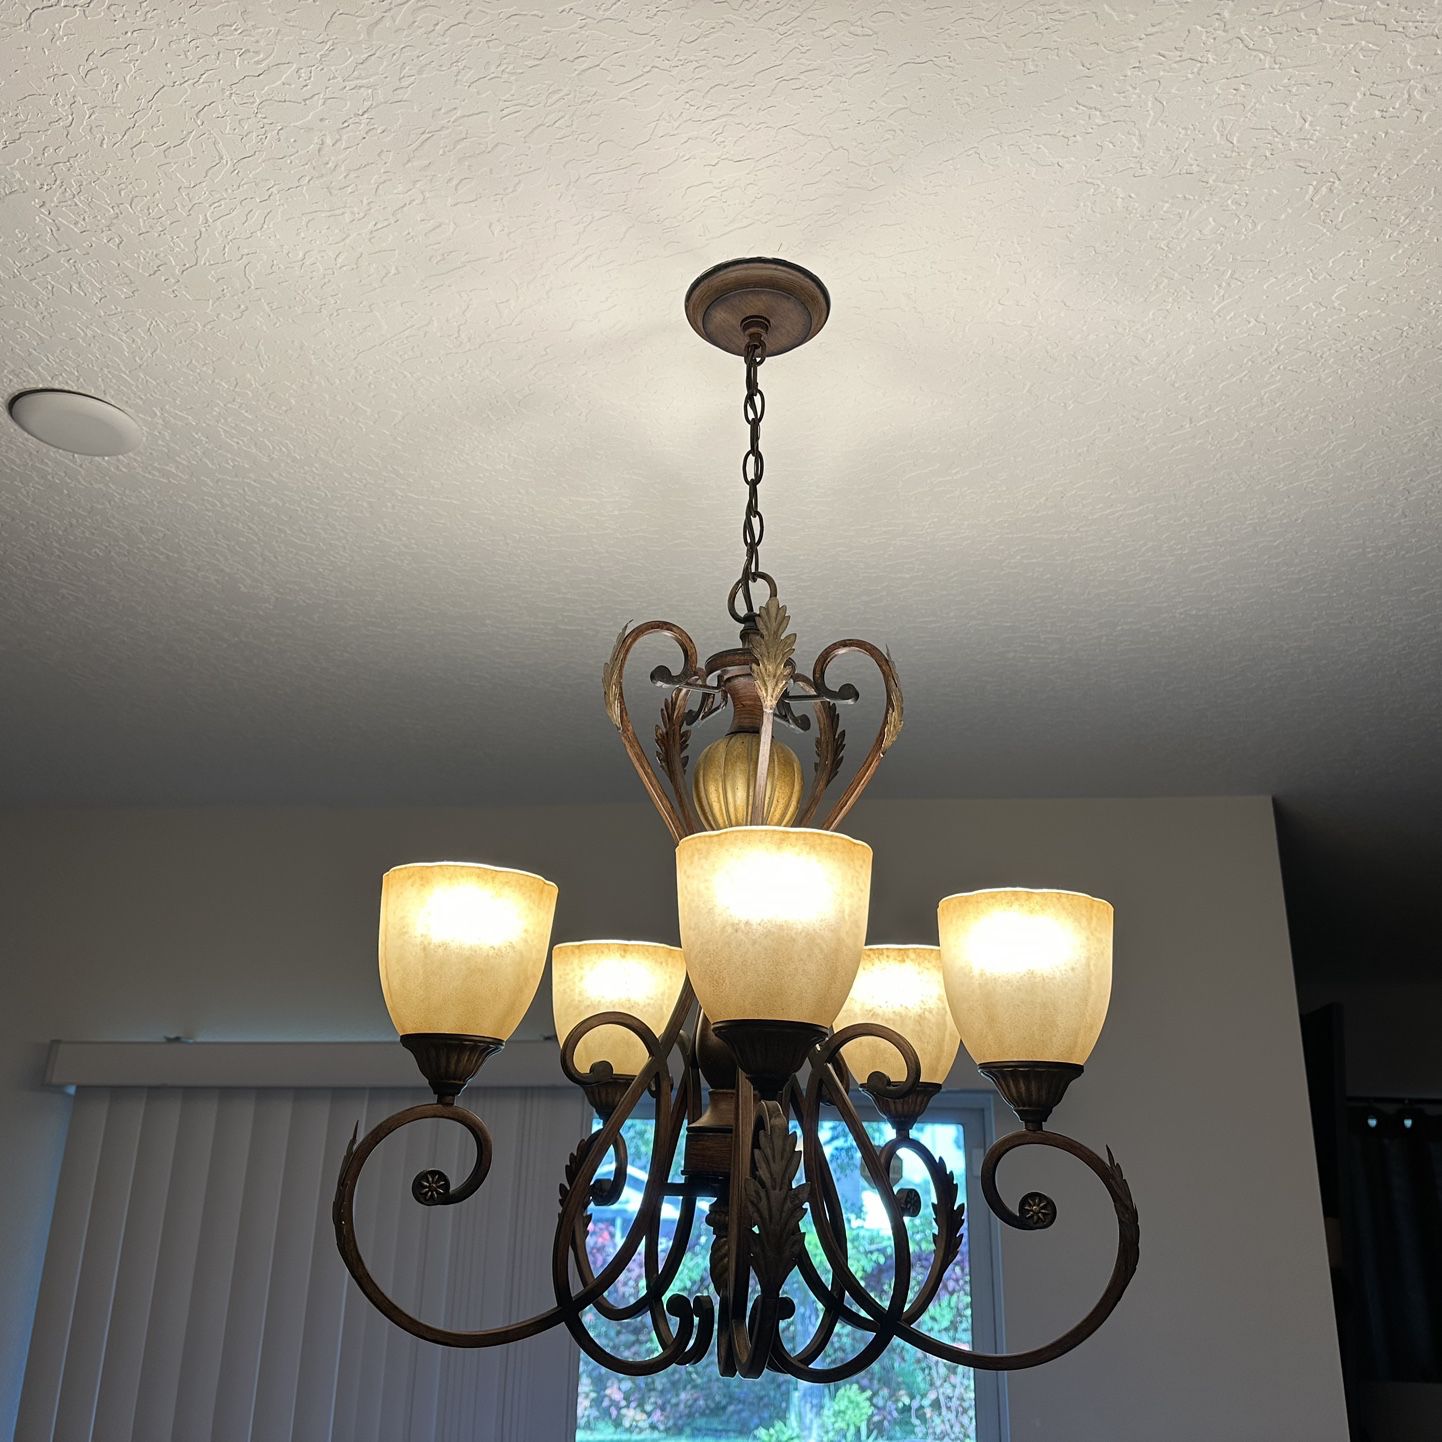 Selling Chandelier, Pendants, And Two Lamps